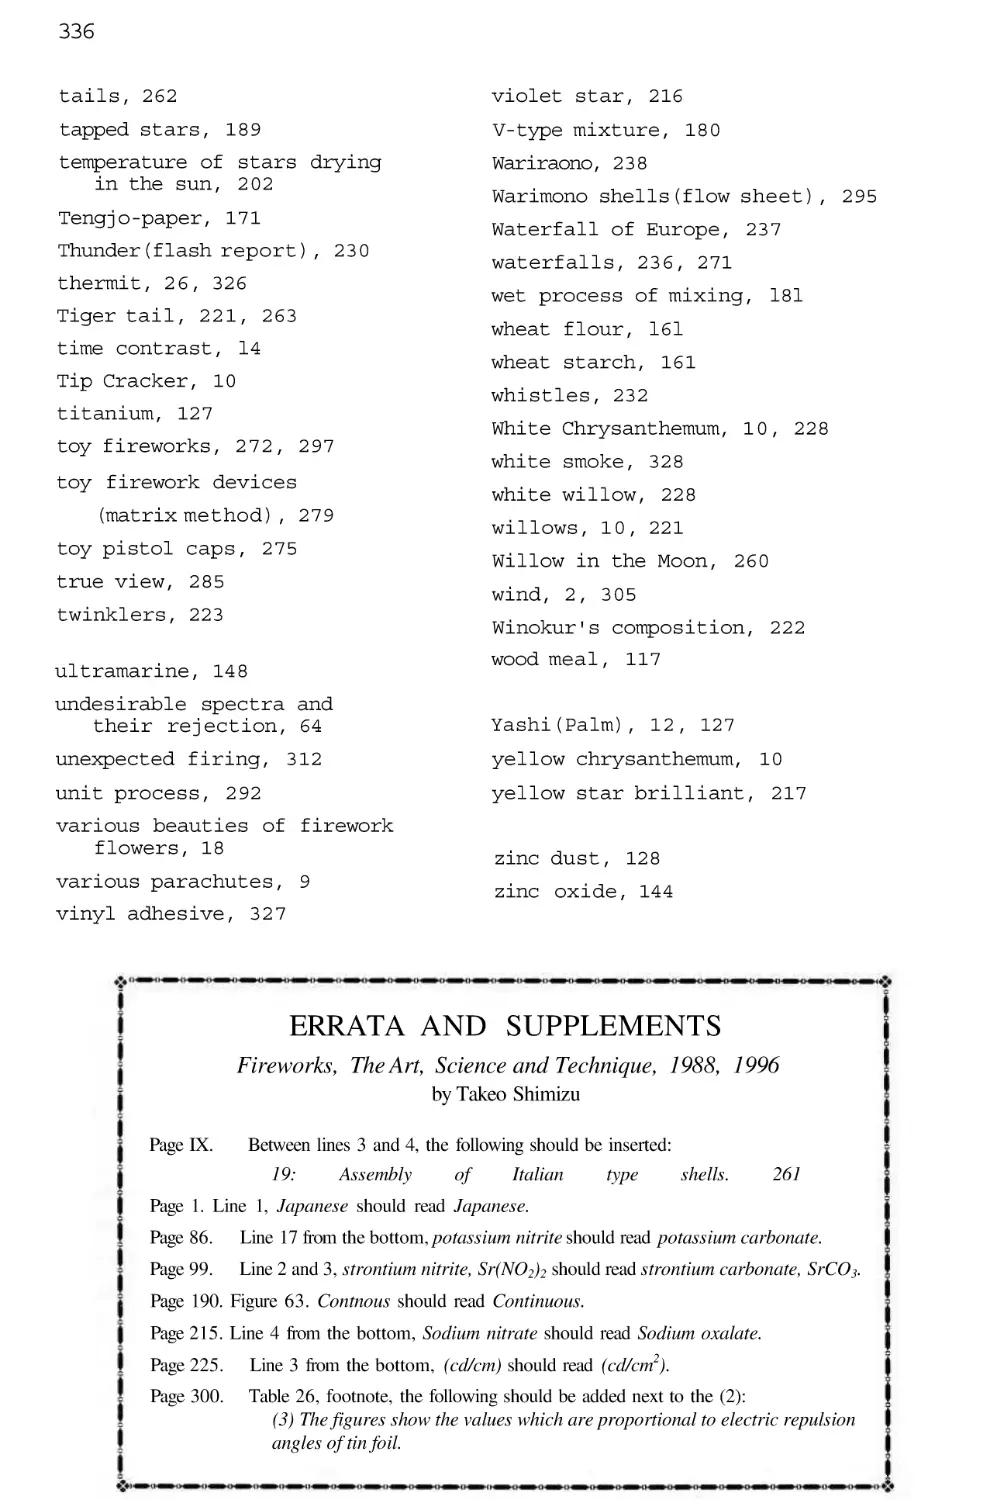 T
U
V
W
X
Y
Z
ERRATA AND SUPPLEMENTS